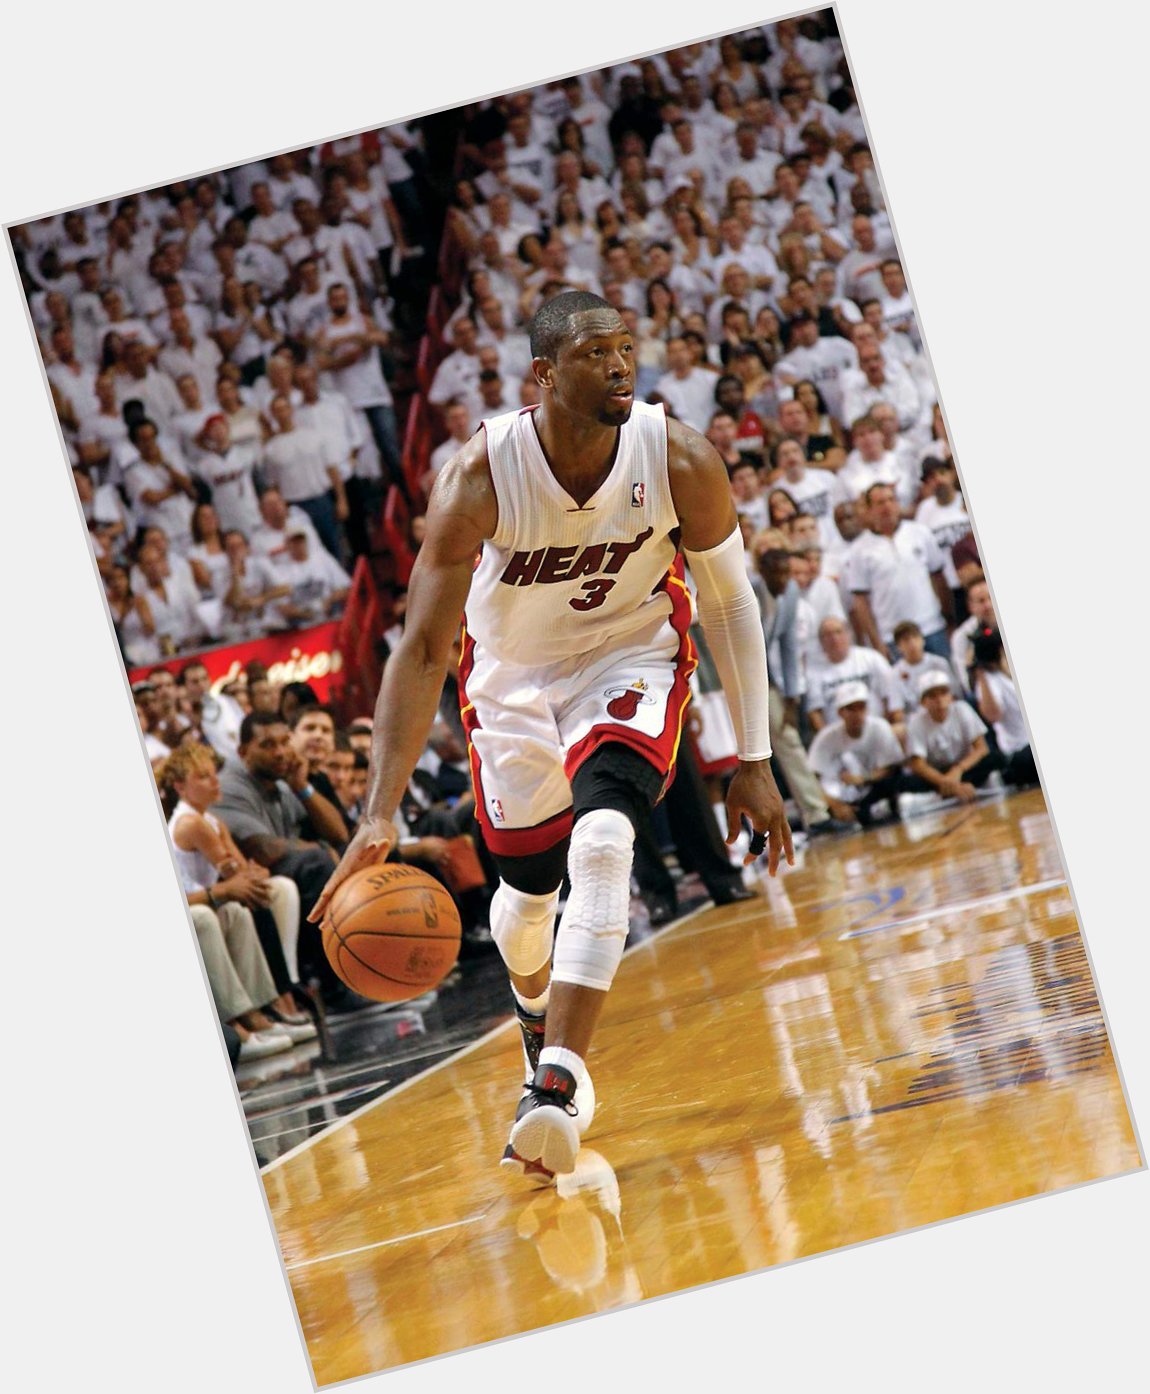 Happy 39th birthday to the Miami Heat legend, 3x NBA Champion, 13x NBA All-Star and soon to be HOFer, Dwyane Wade. 